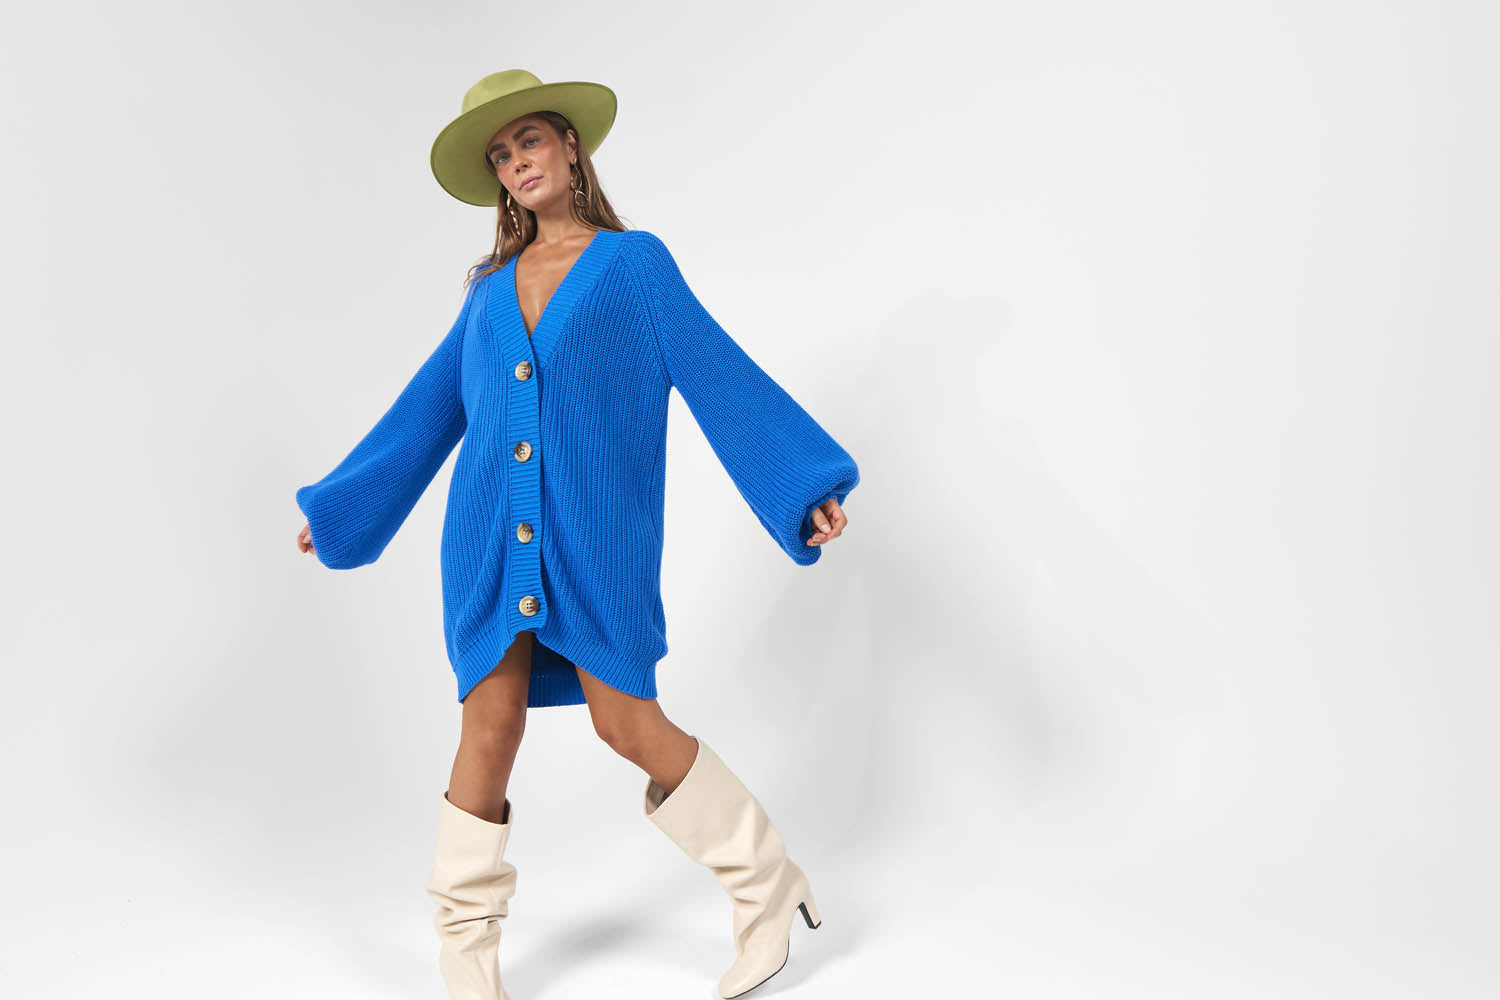 Model wearing oversized blue knitted cardigan, with big buttons down the front and billow sleeves.